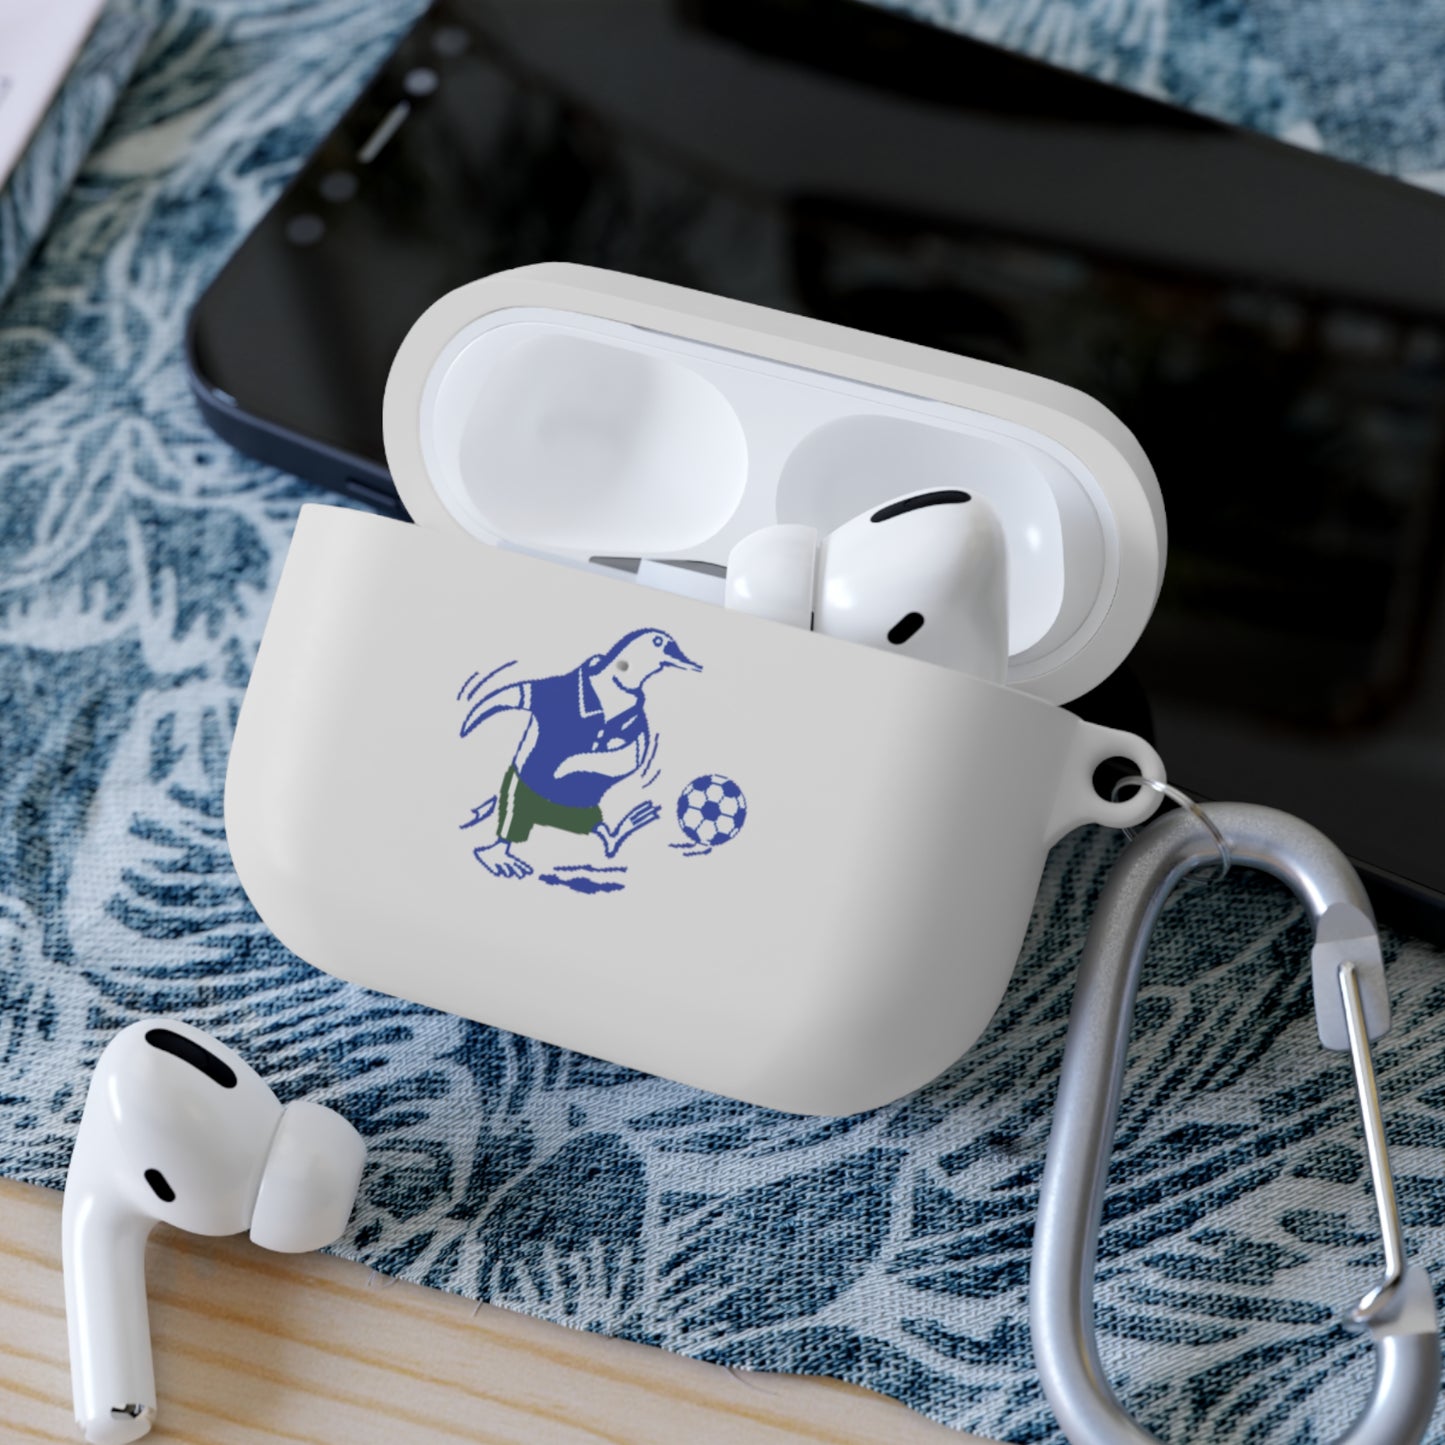 F.C. Libourne Saint-Seurin/L'Isle AirPods and AirPods Pro Case Cover